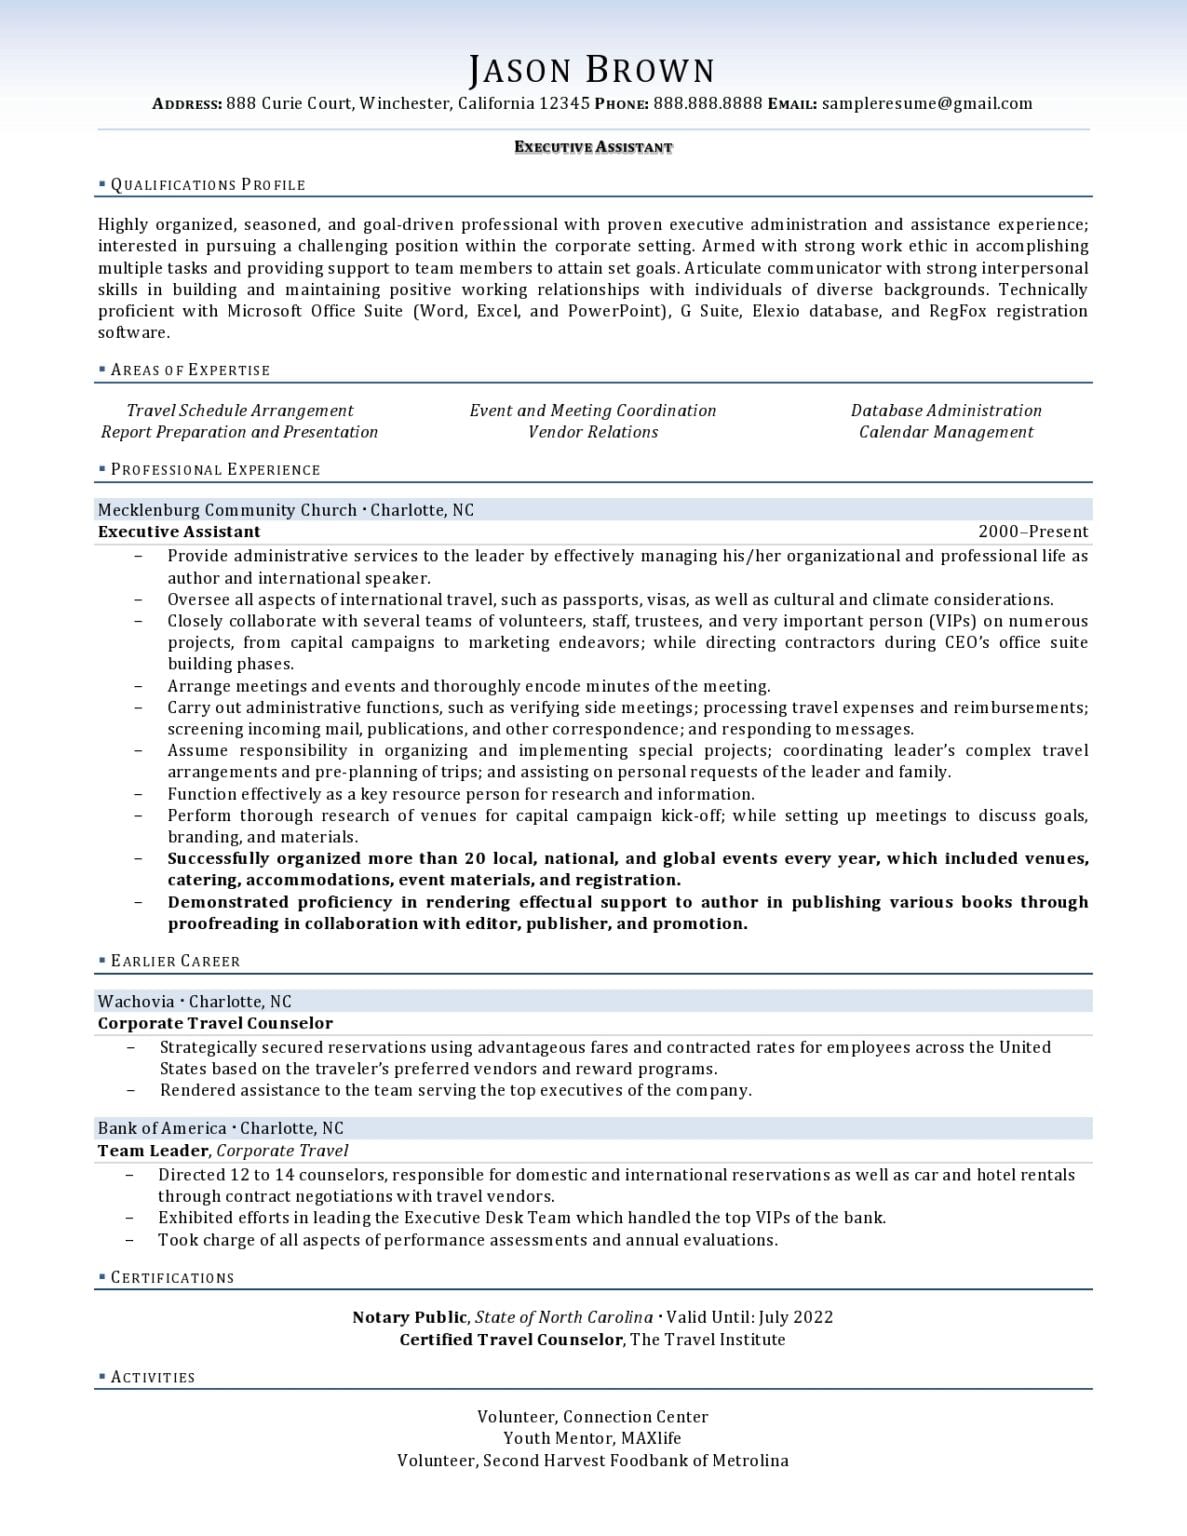 executive assistant resume summary statement